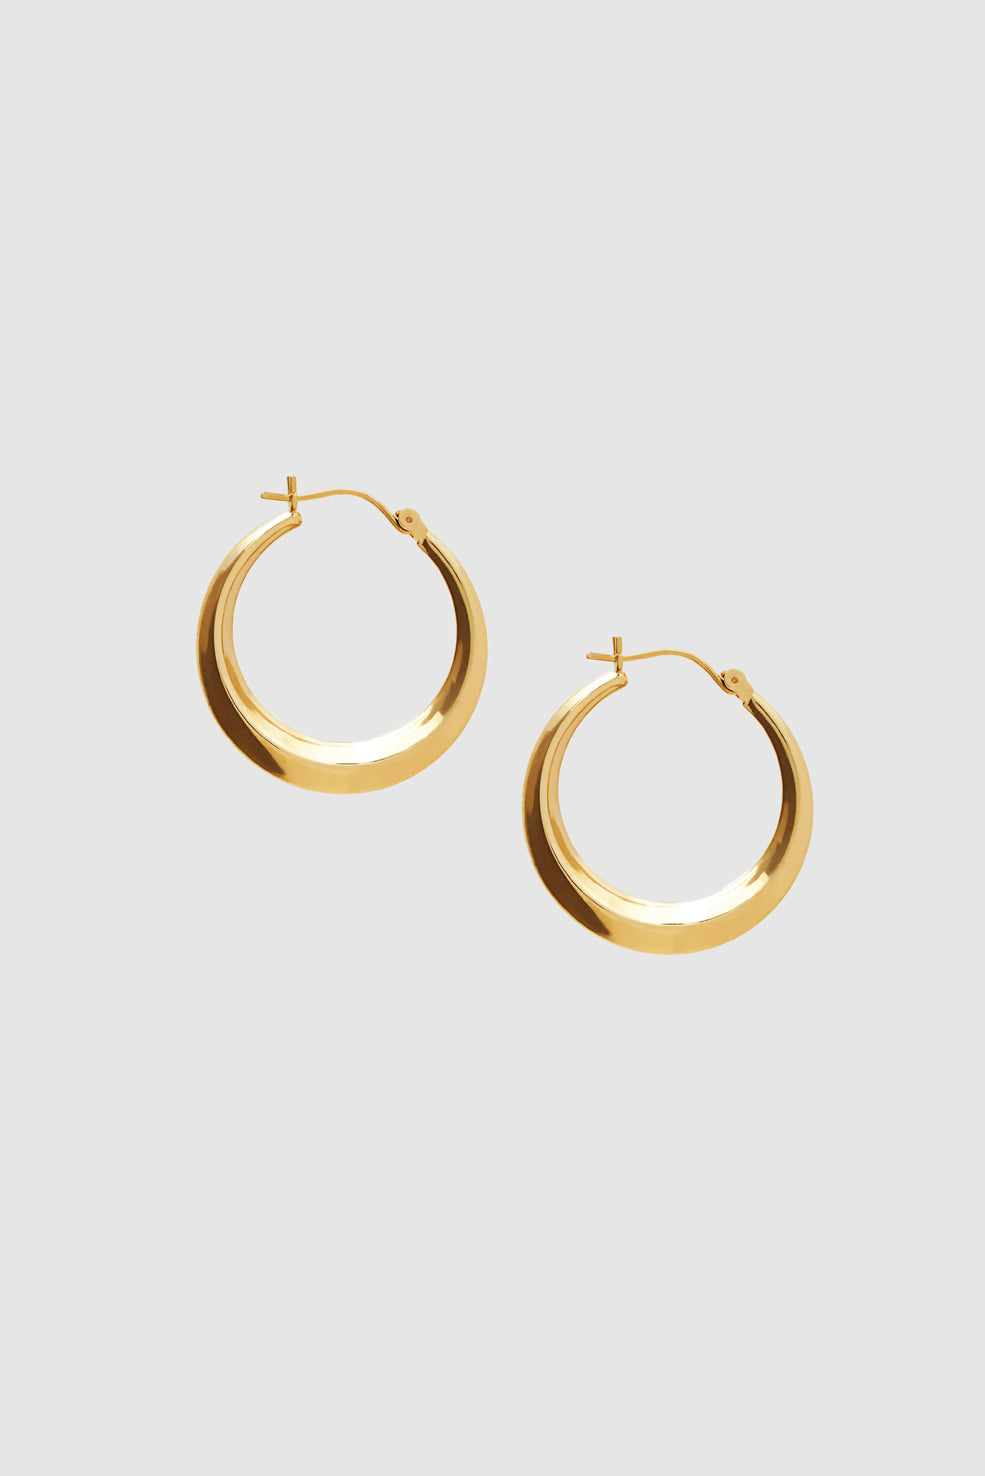 ANINE BING Small Knife Edge Hoop Earrings - 14k Gold - Second Front View